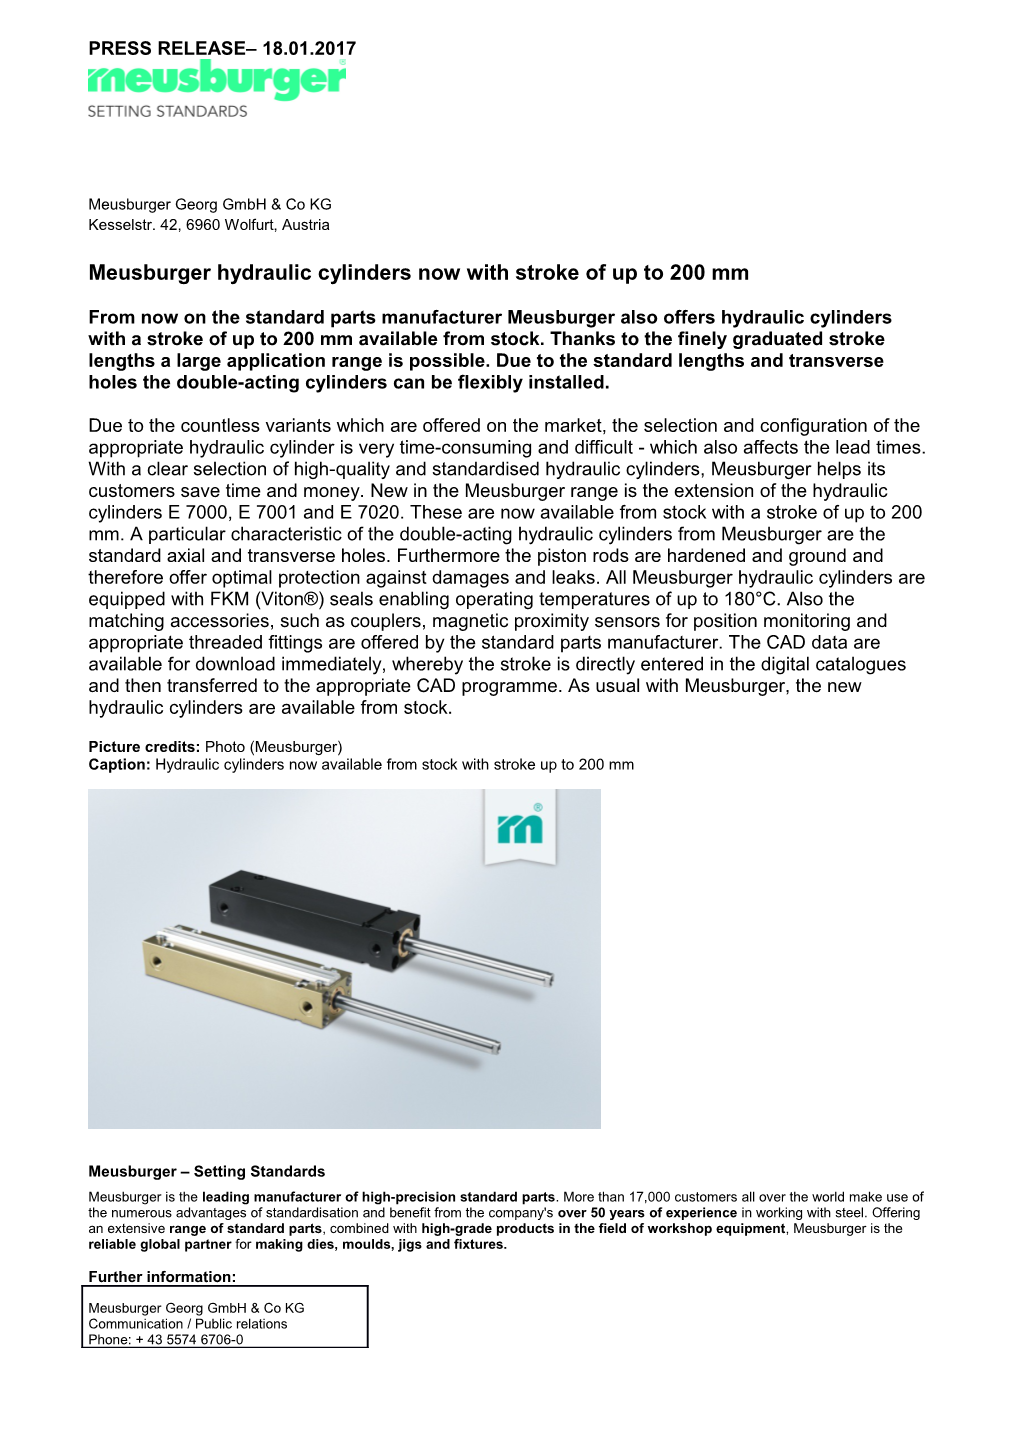 Meusburger Hydraulic Cylinders Now with Stroke of up to 200 Mm